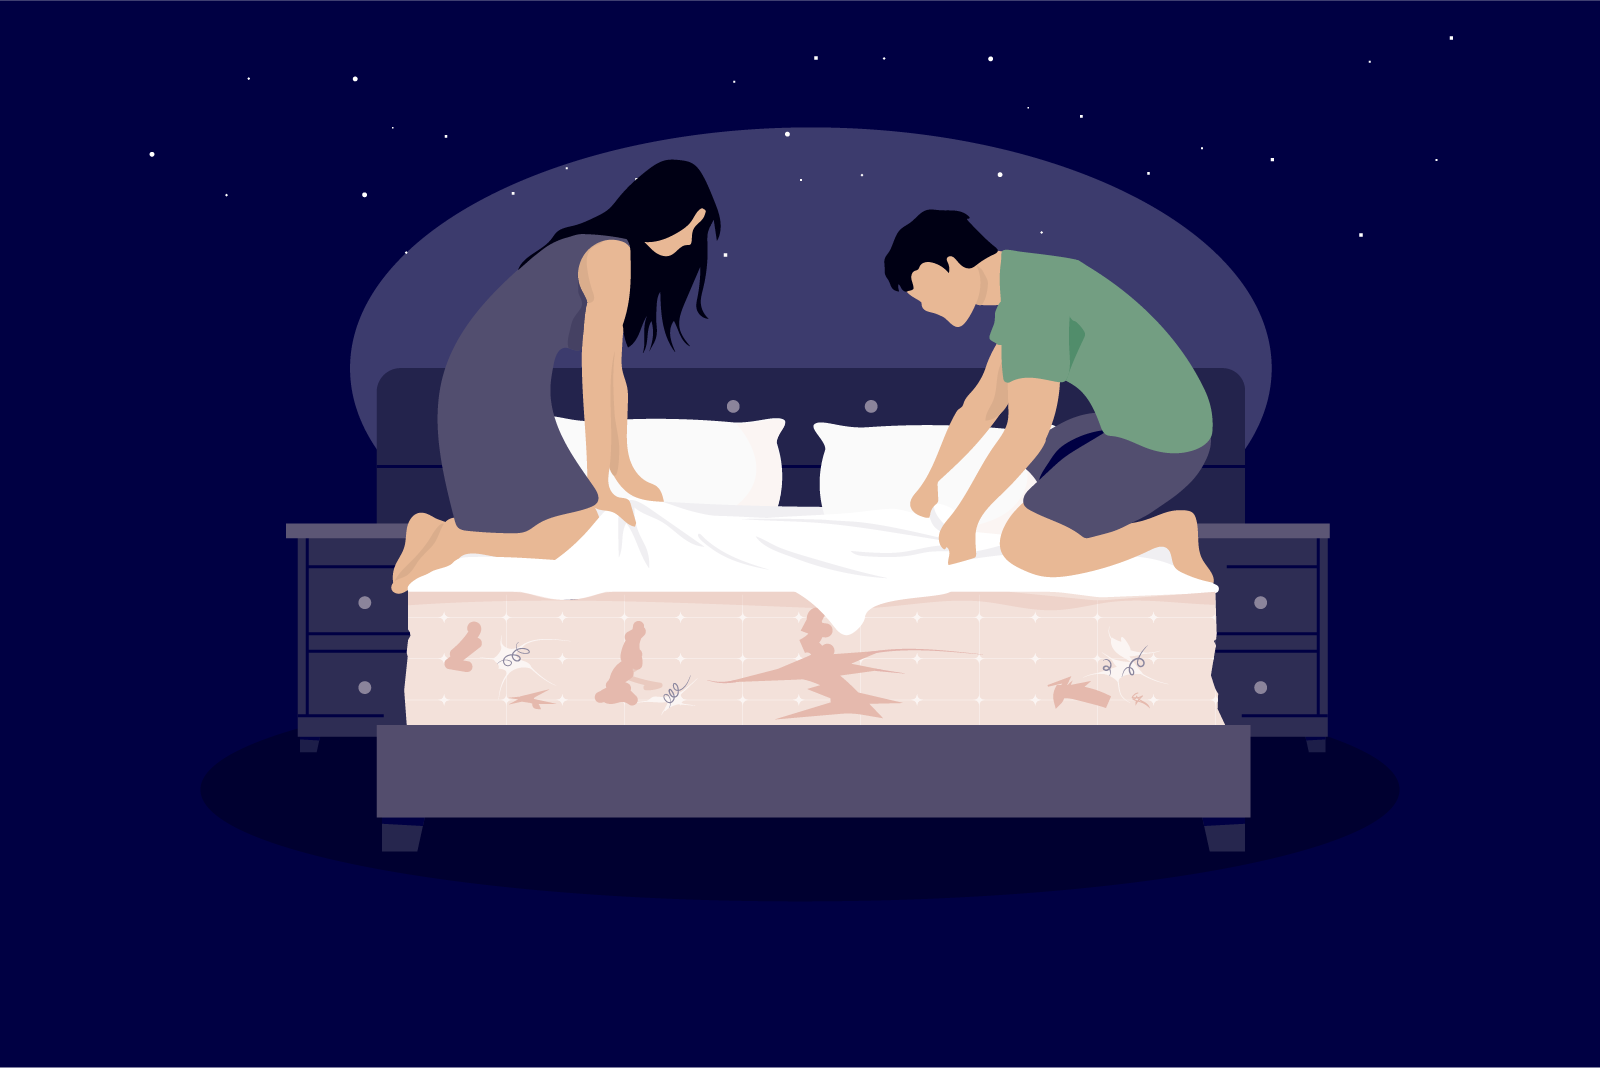 how long should a mattress last: illustration of a couple making the bed, showing the mattress with visible damage